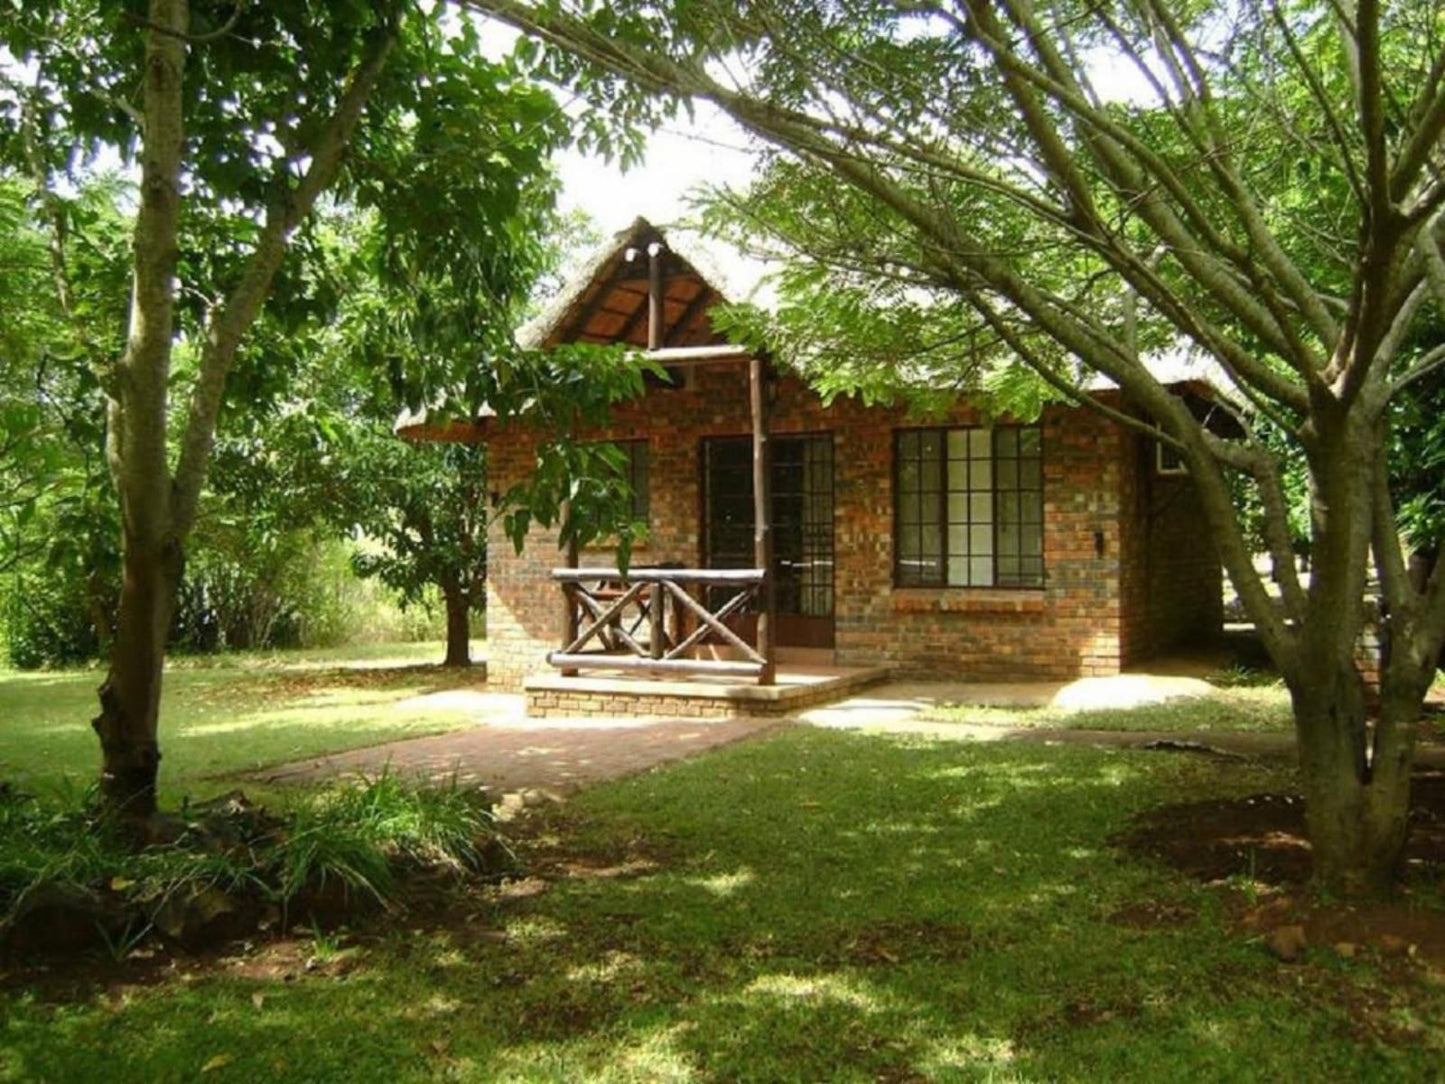 Orchards Farm Cottages Komatipoort Mpumalanga South Africa Colorful